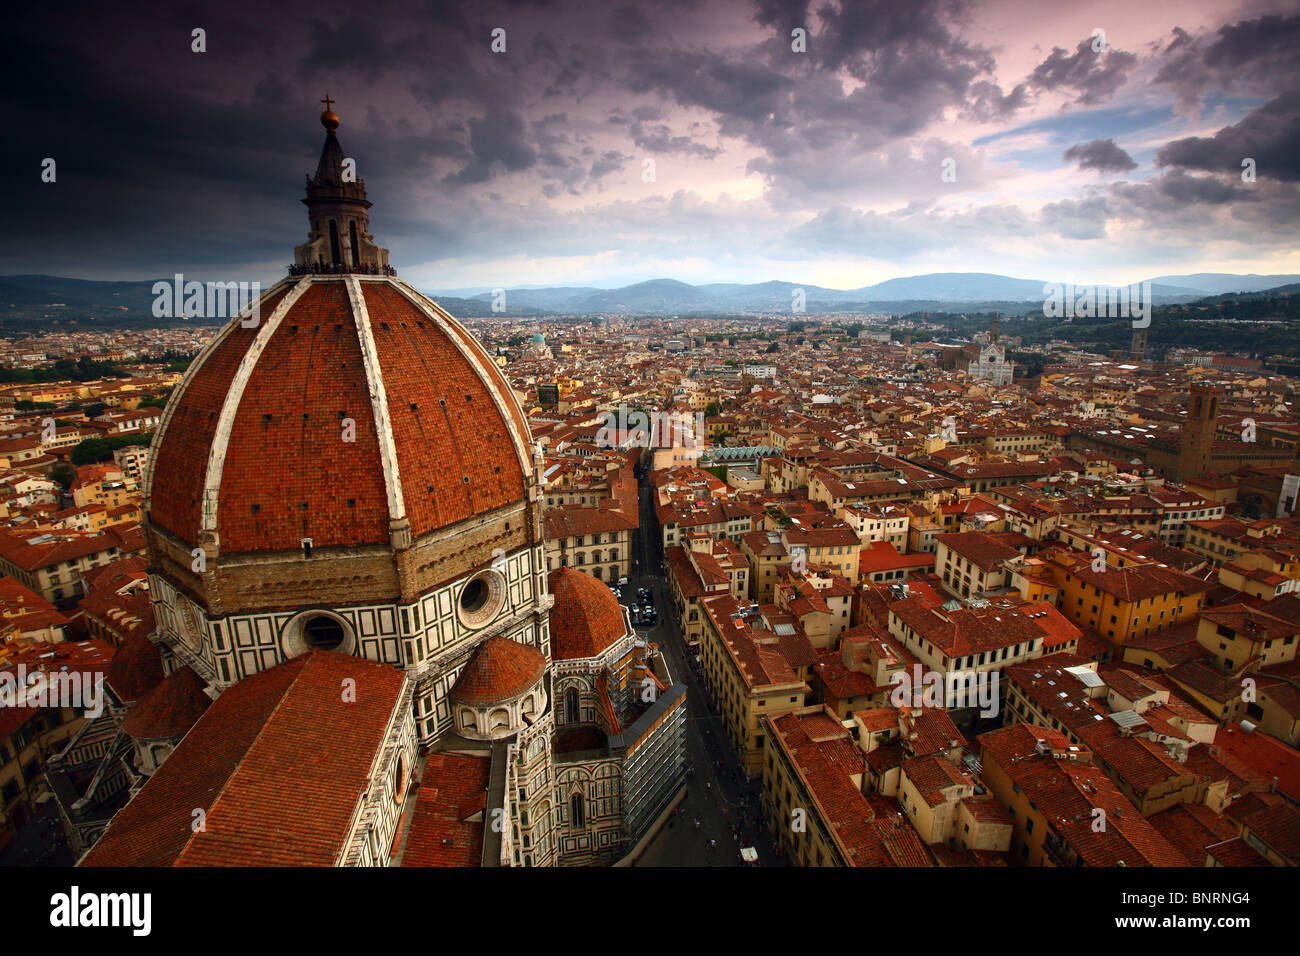 The dome of the Florence Duomo, as seen from the Campanile, under approaching storm clouds, Italy. Stock Photo